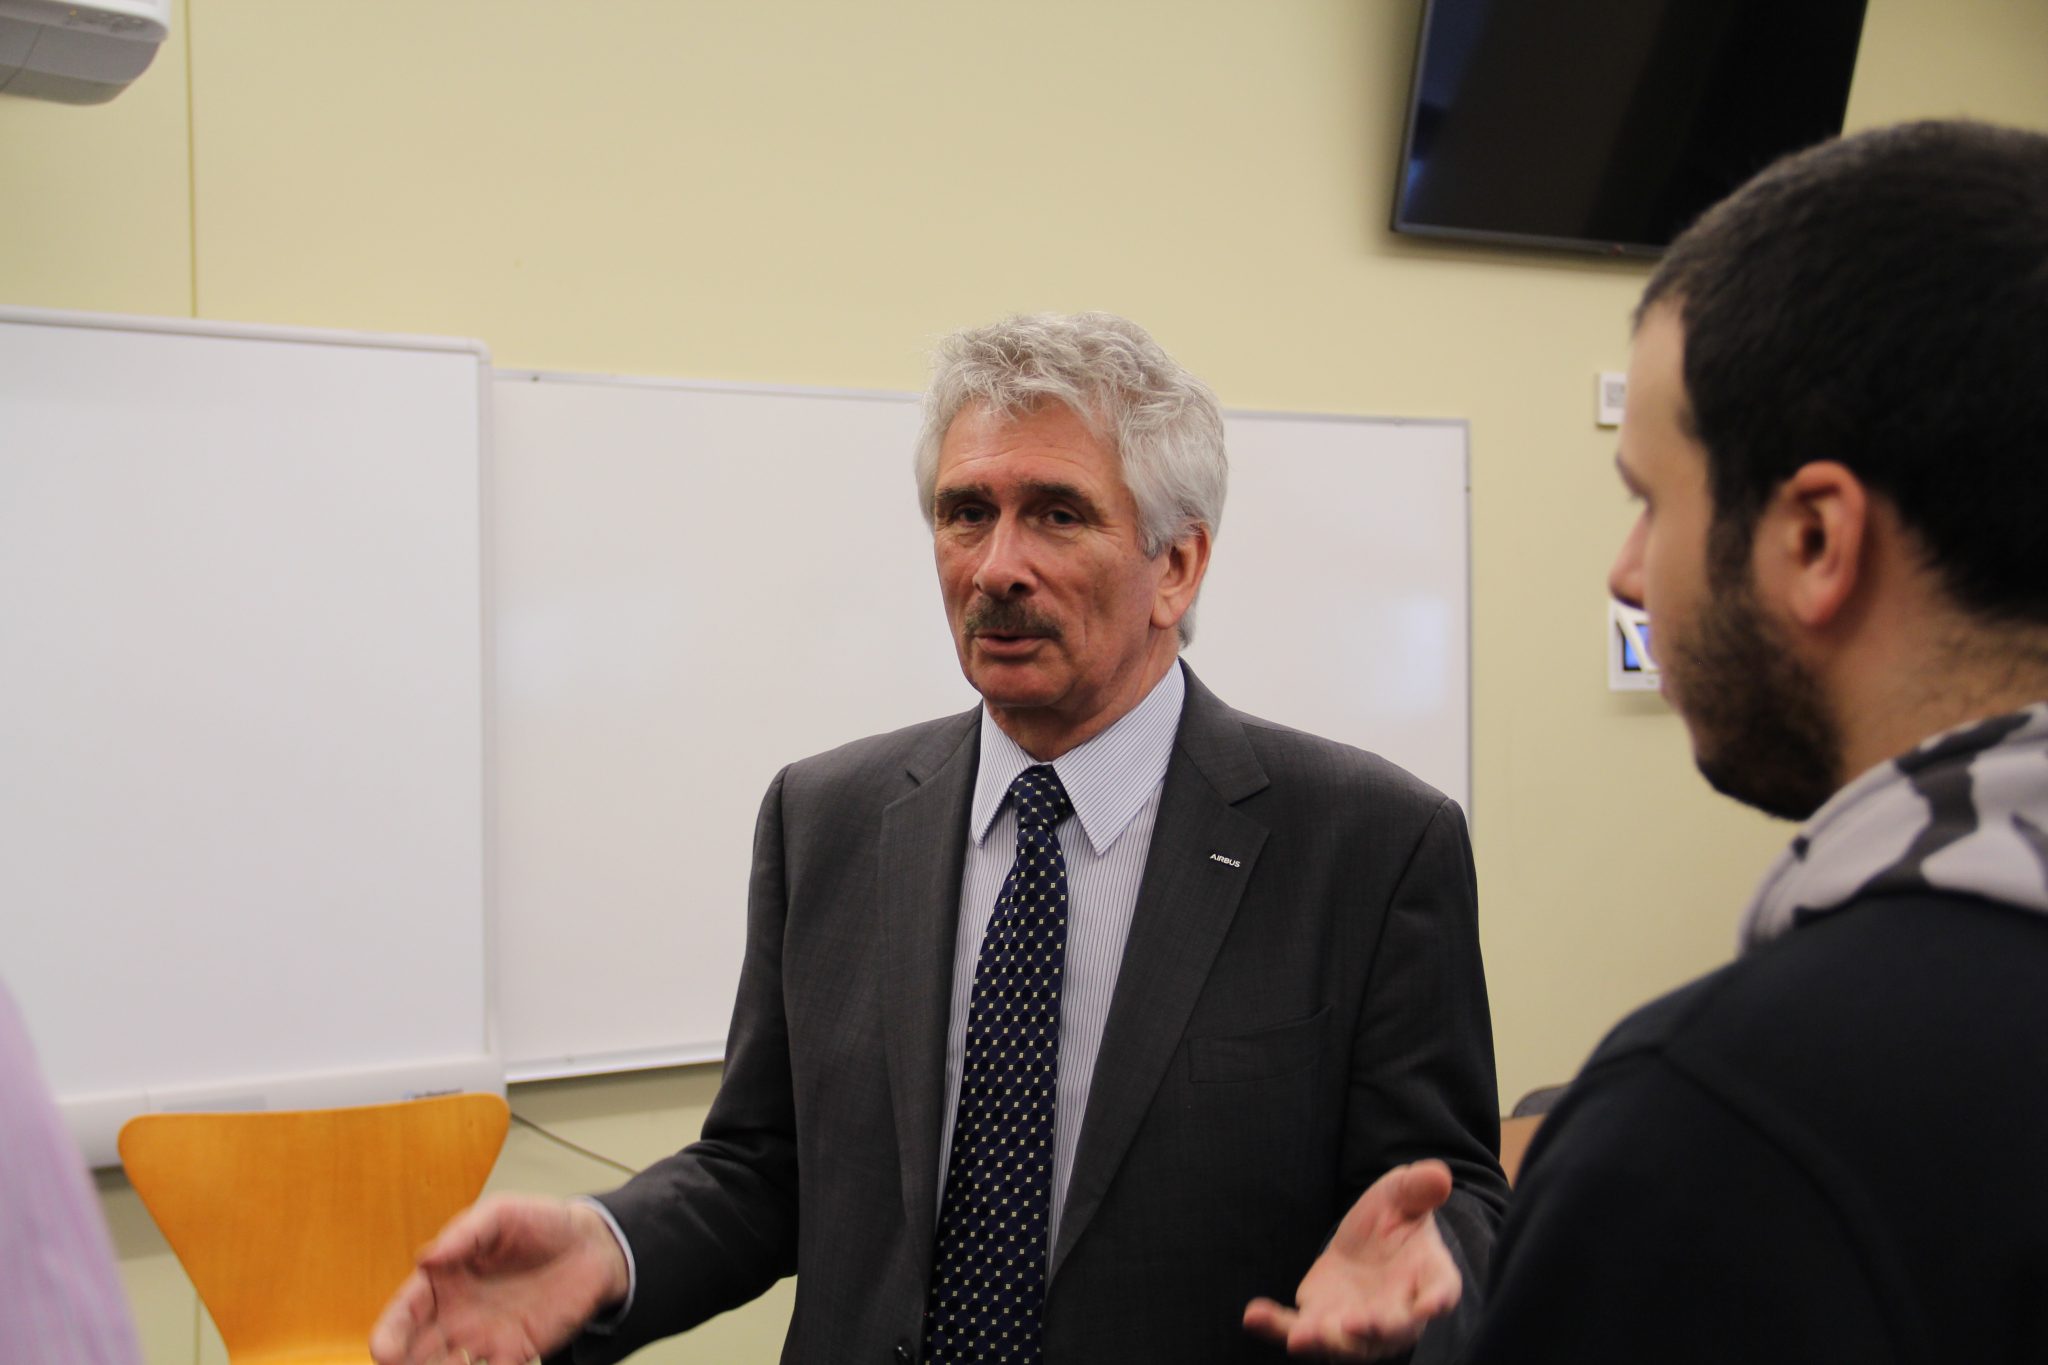 President of Airbus Americas Shares Career Advice with Vaughn Students